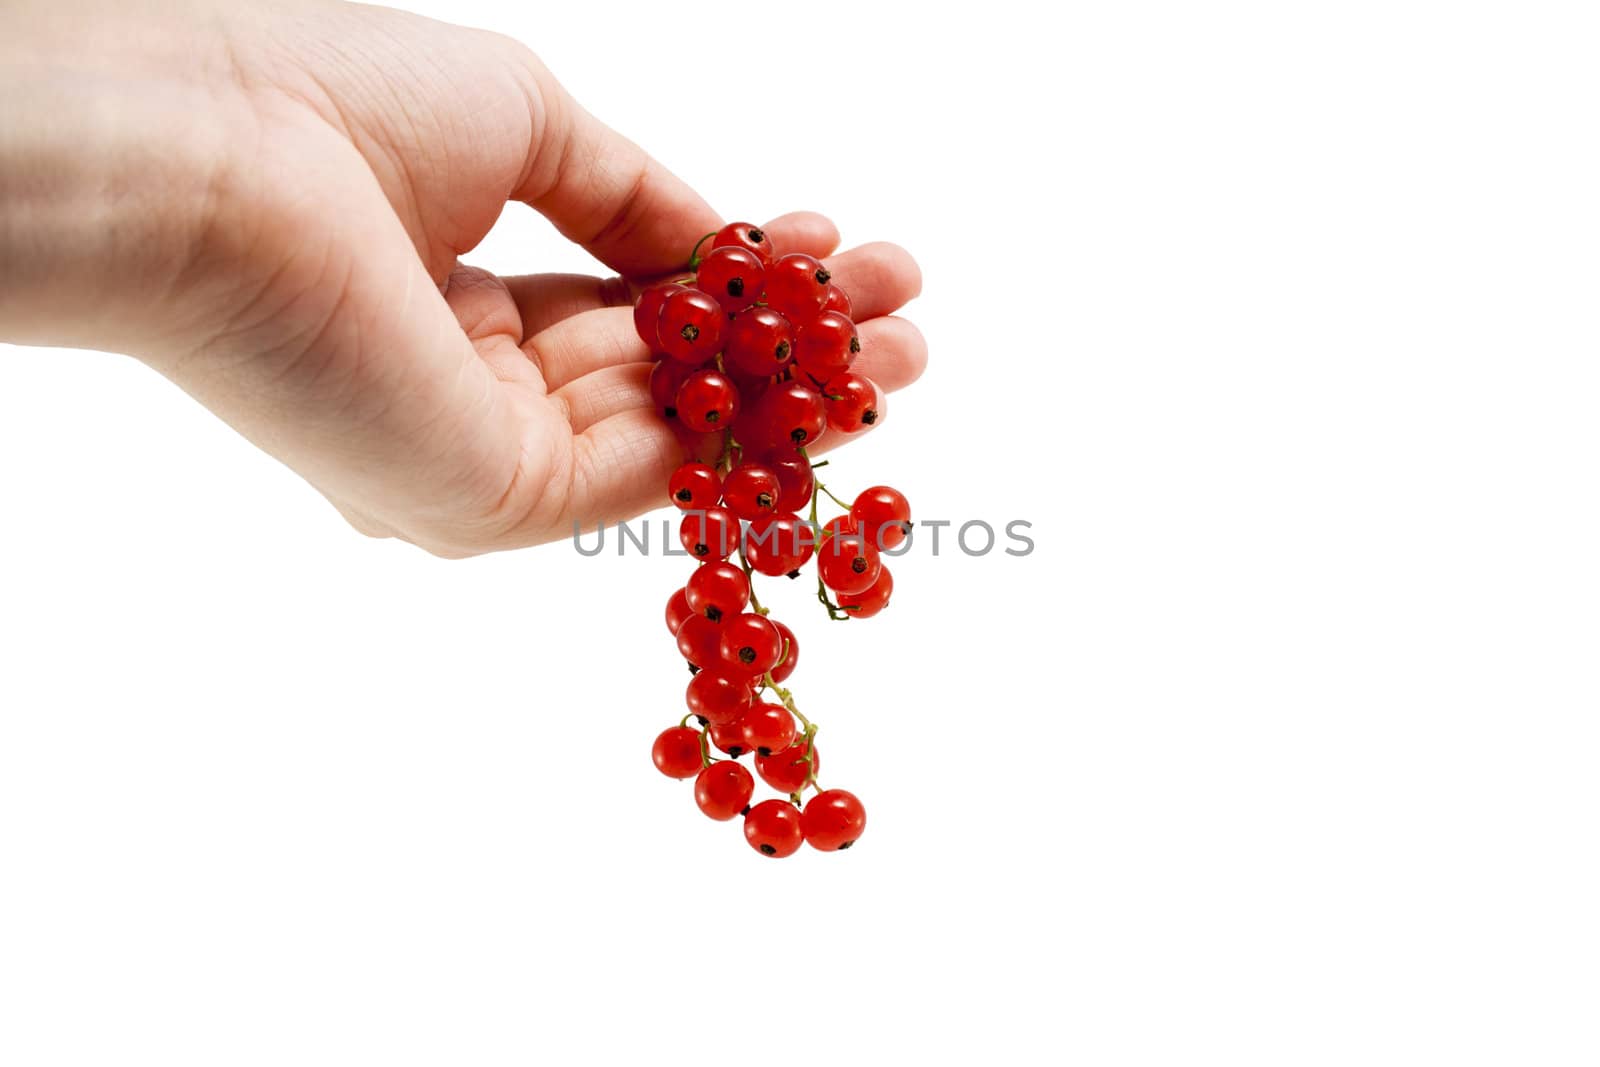 Female hand with red currant berries by magraphics